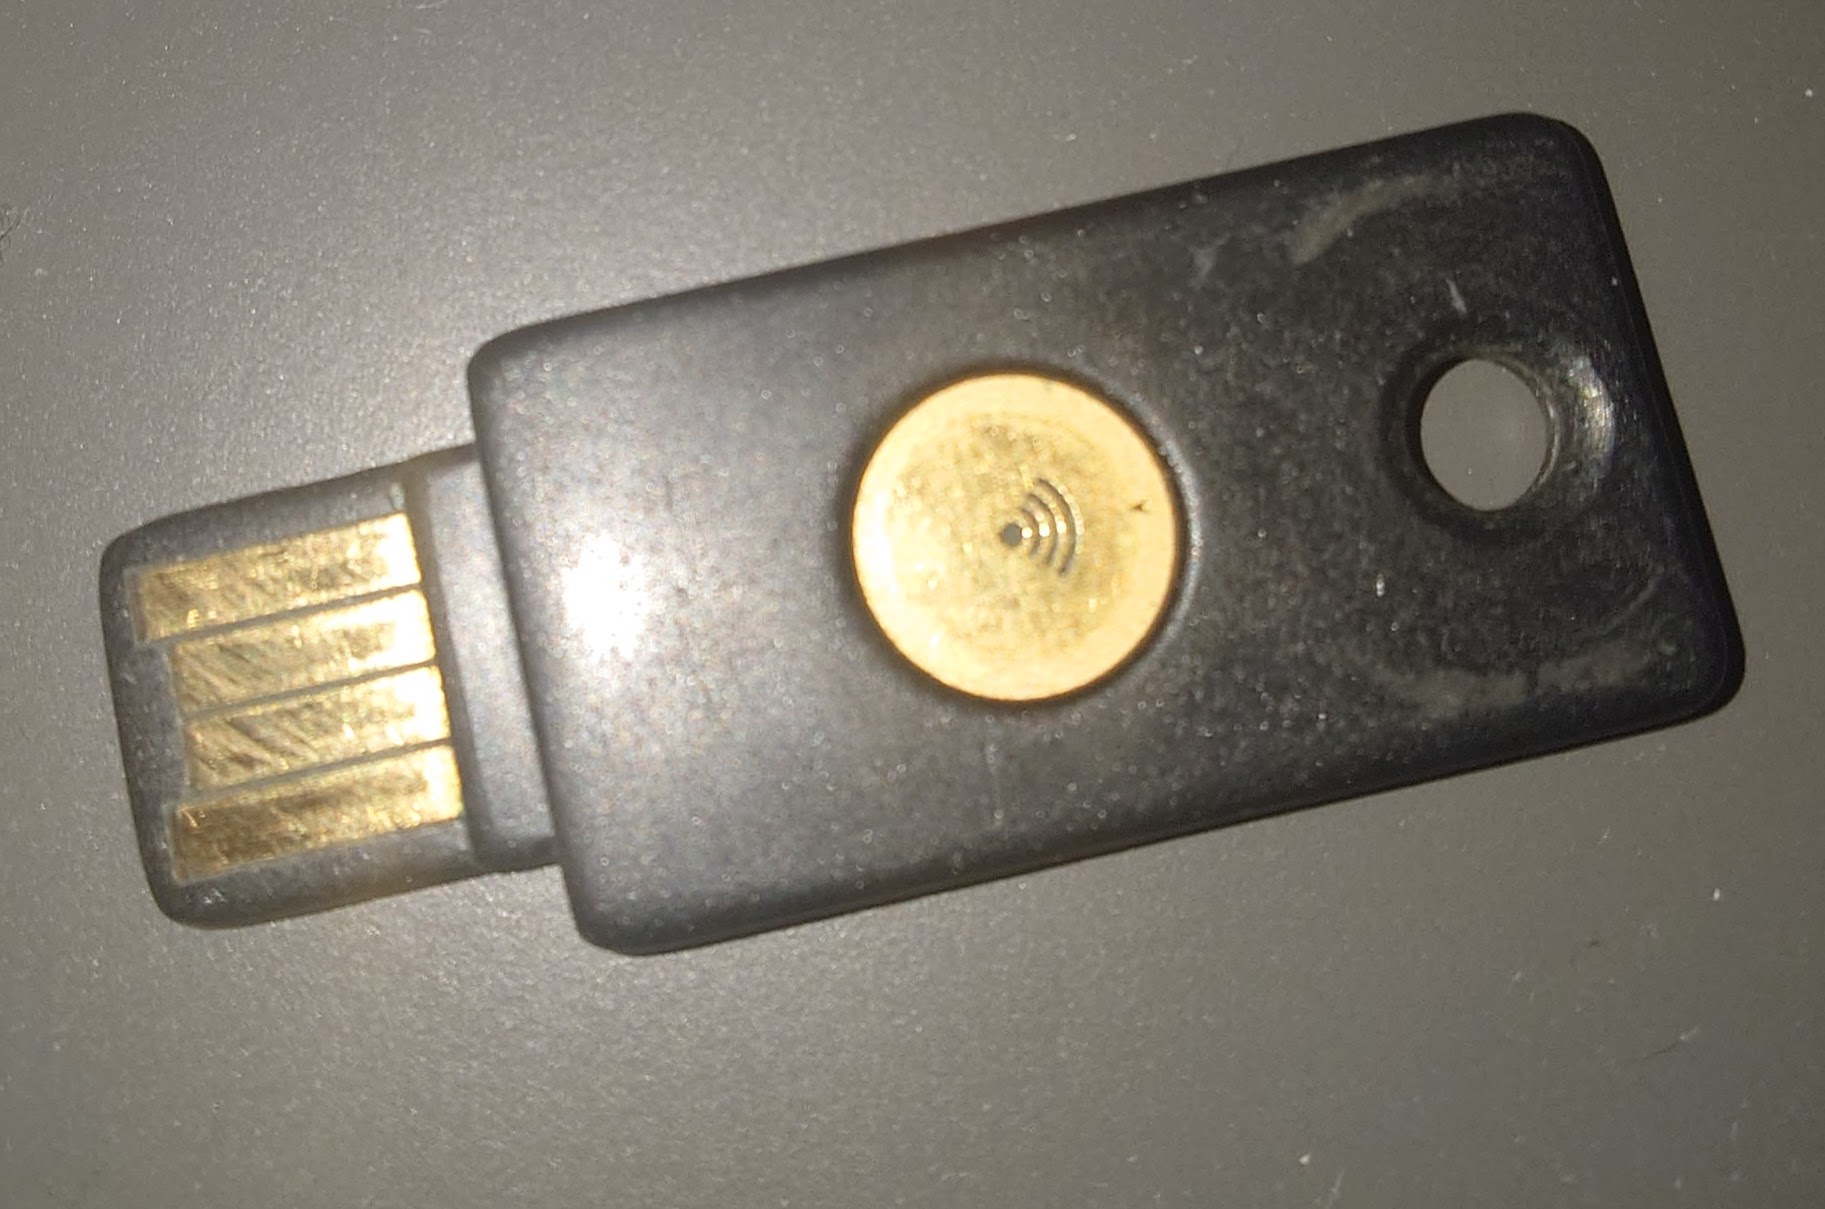 My yubikey, getting old and soon retired. Beaten up really.